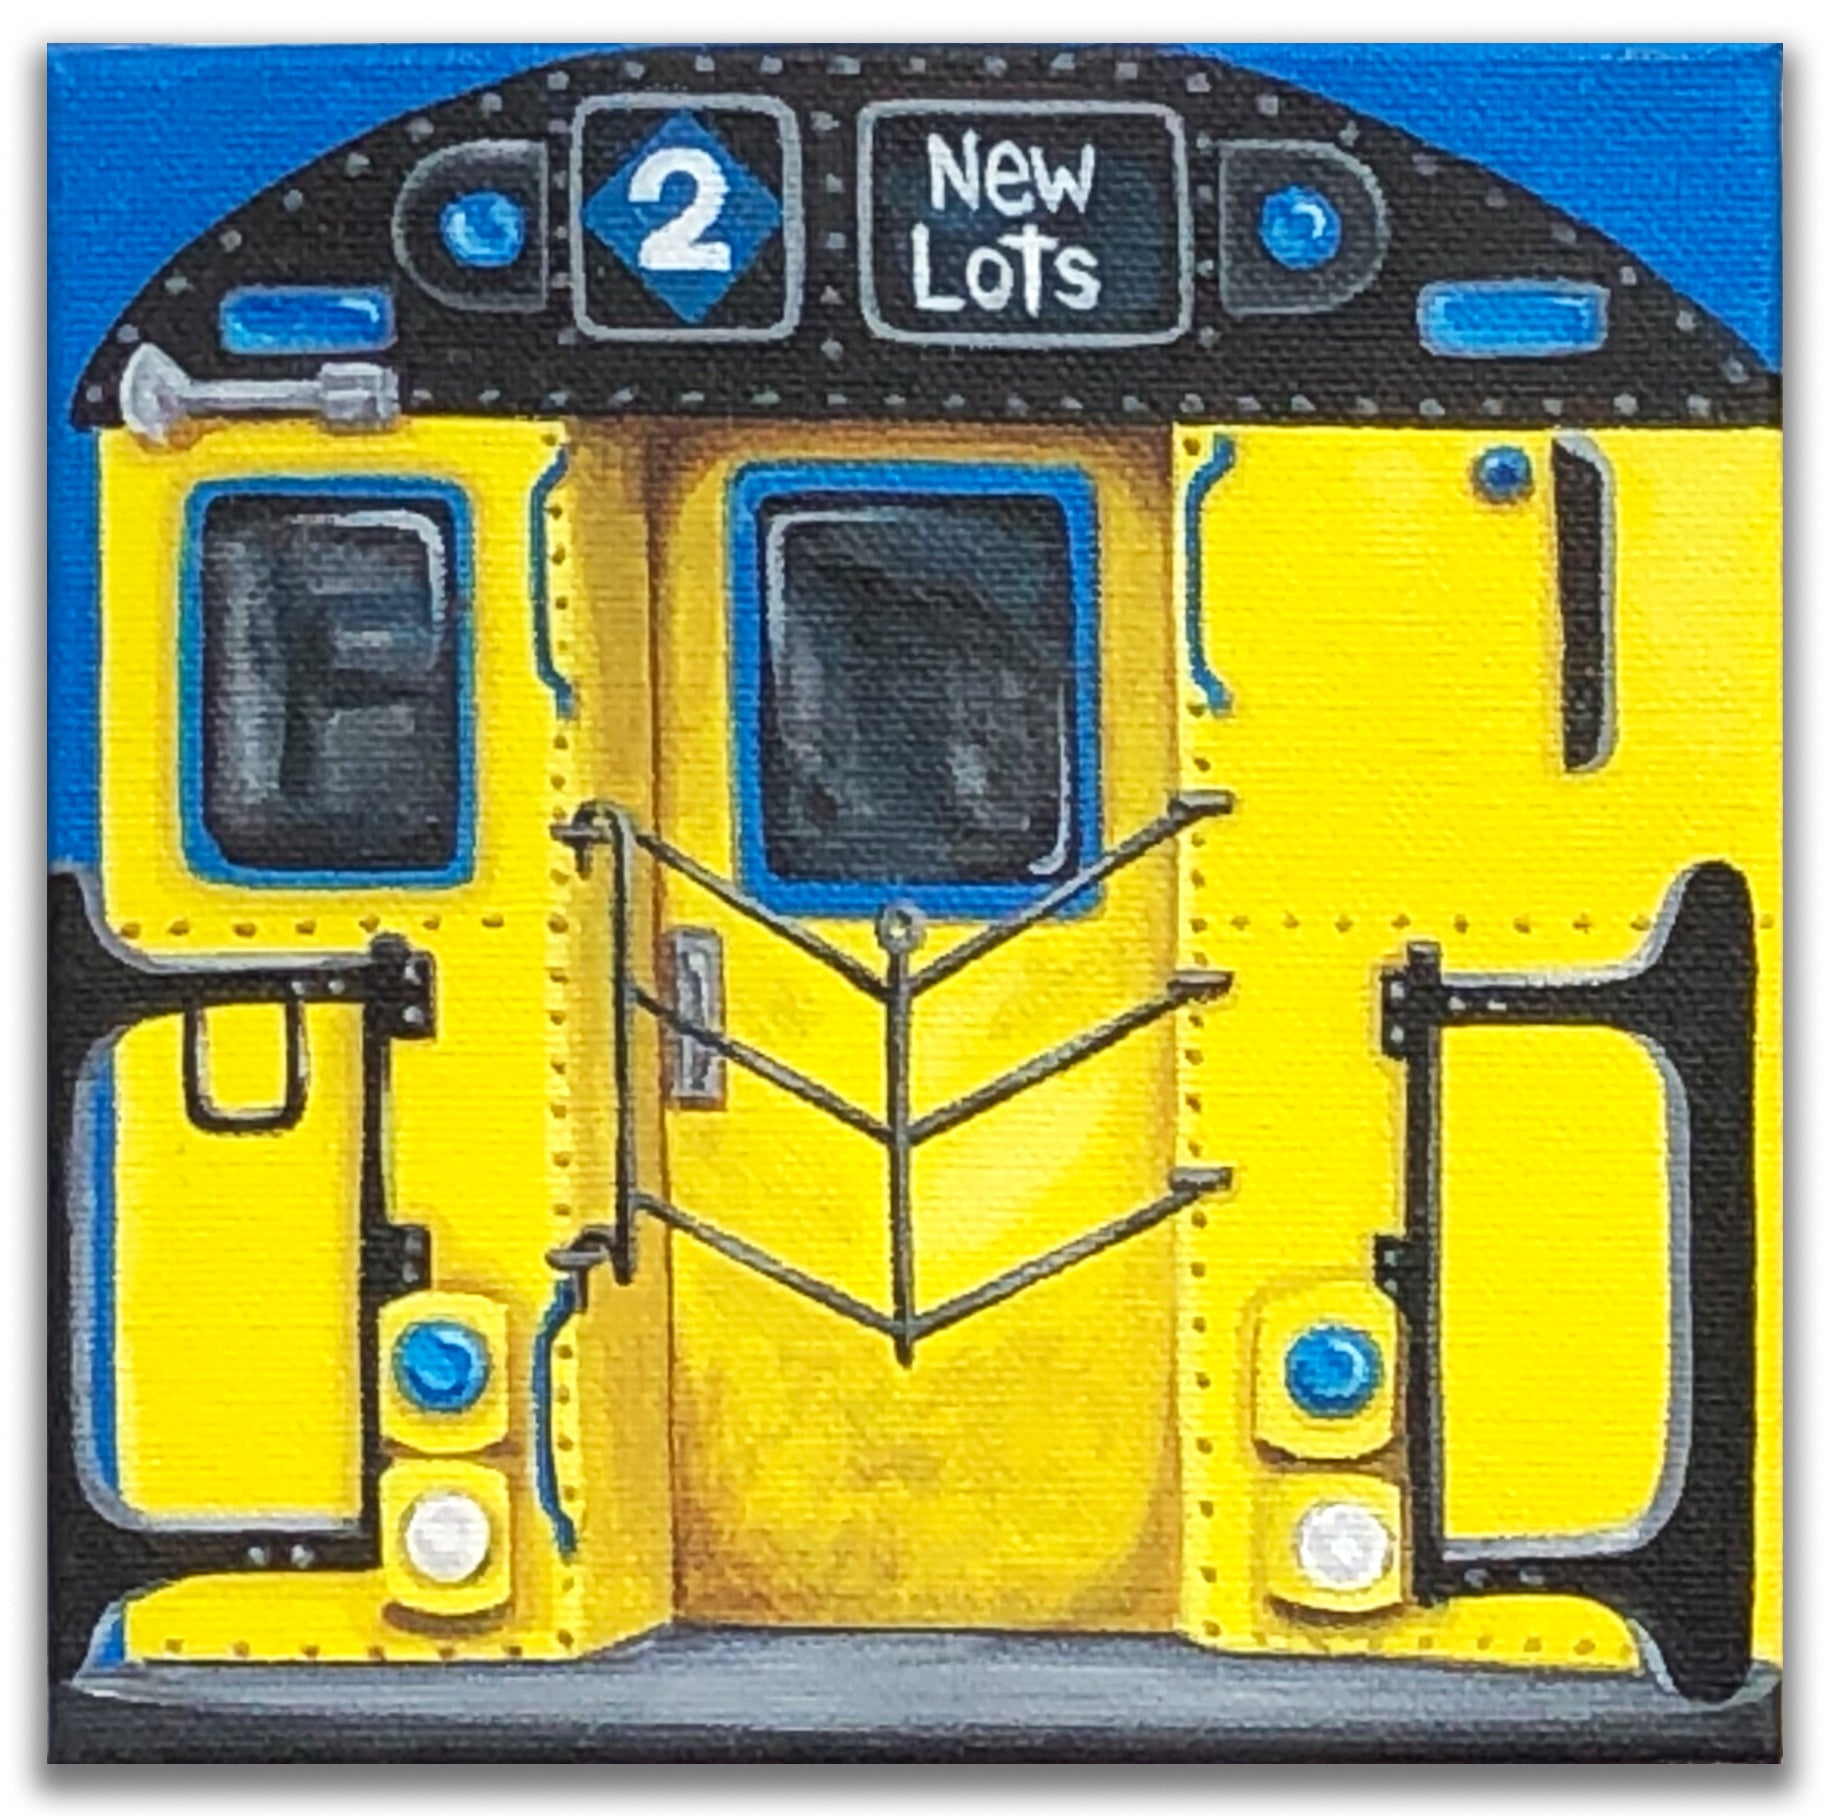 LADY PINK- "New Lots  #2 IRT " Painting